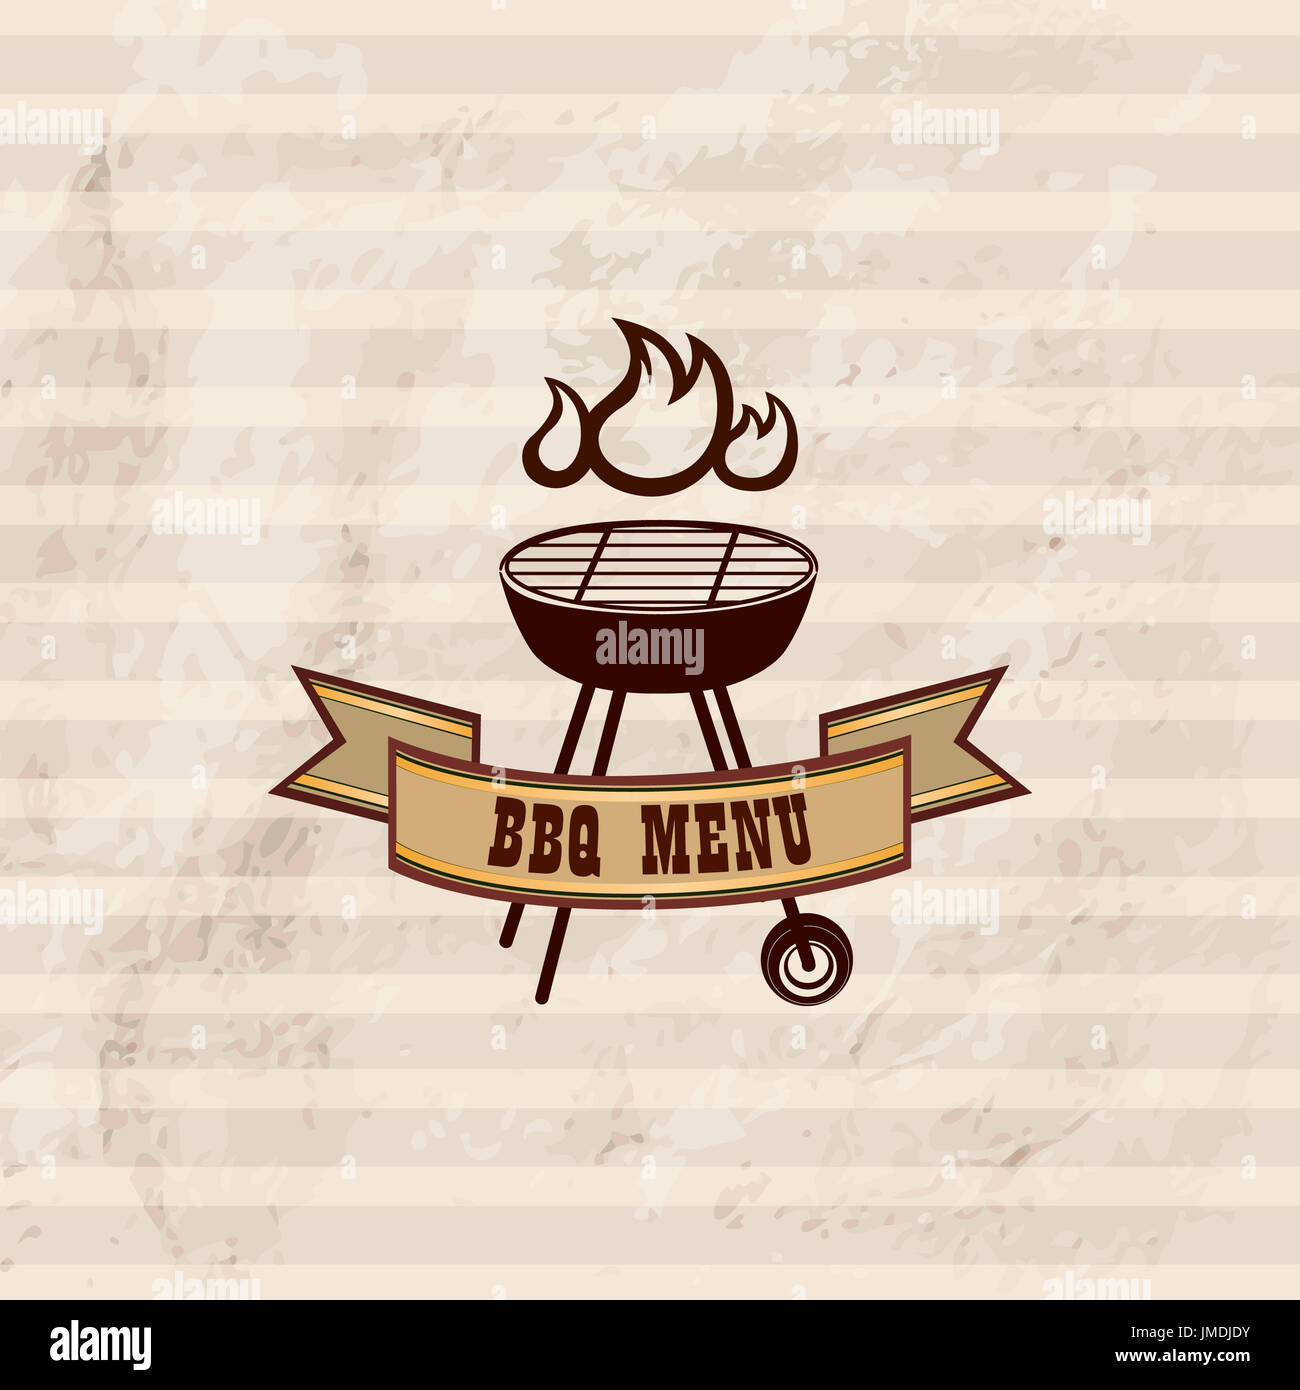 BBQ design wallpaper. Barbecue label over vintage pattern. Grill food retro  background Stock Photo - Alamy